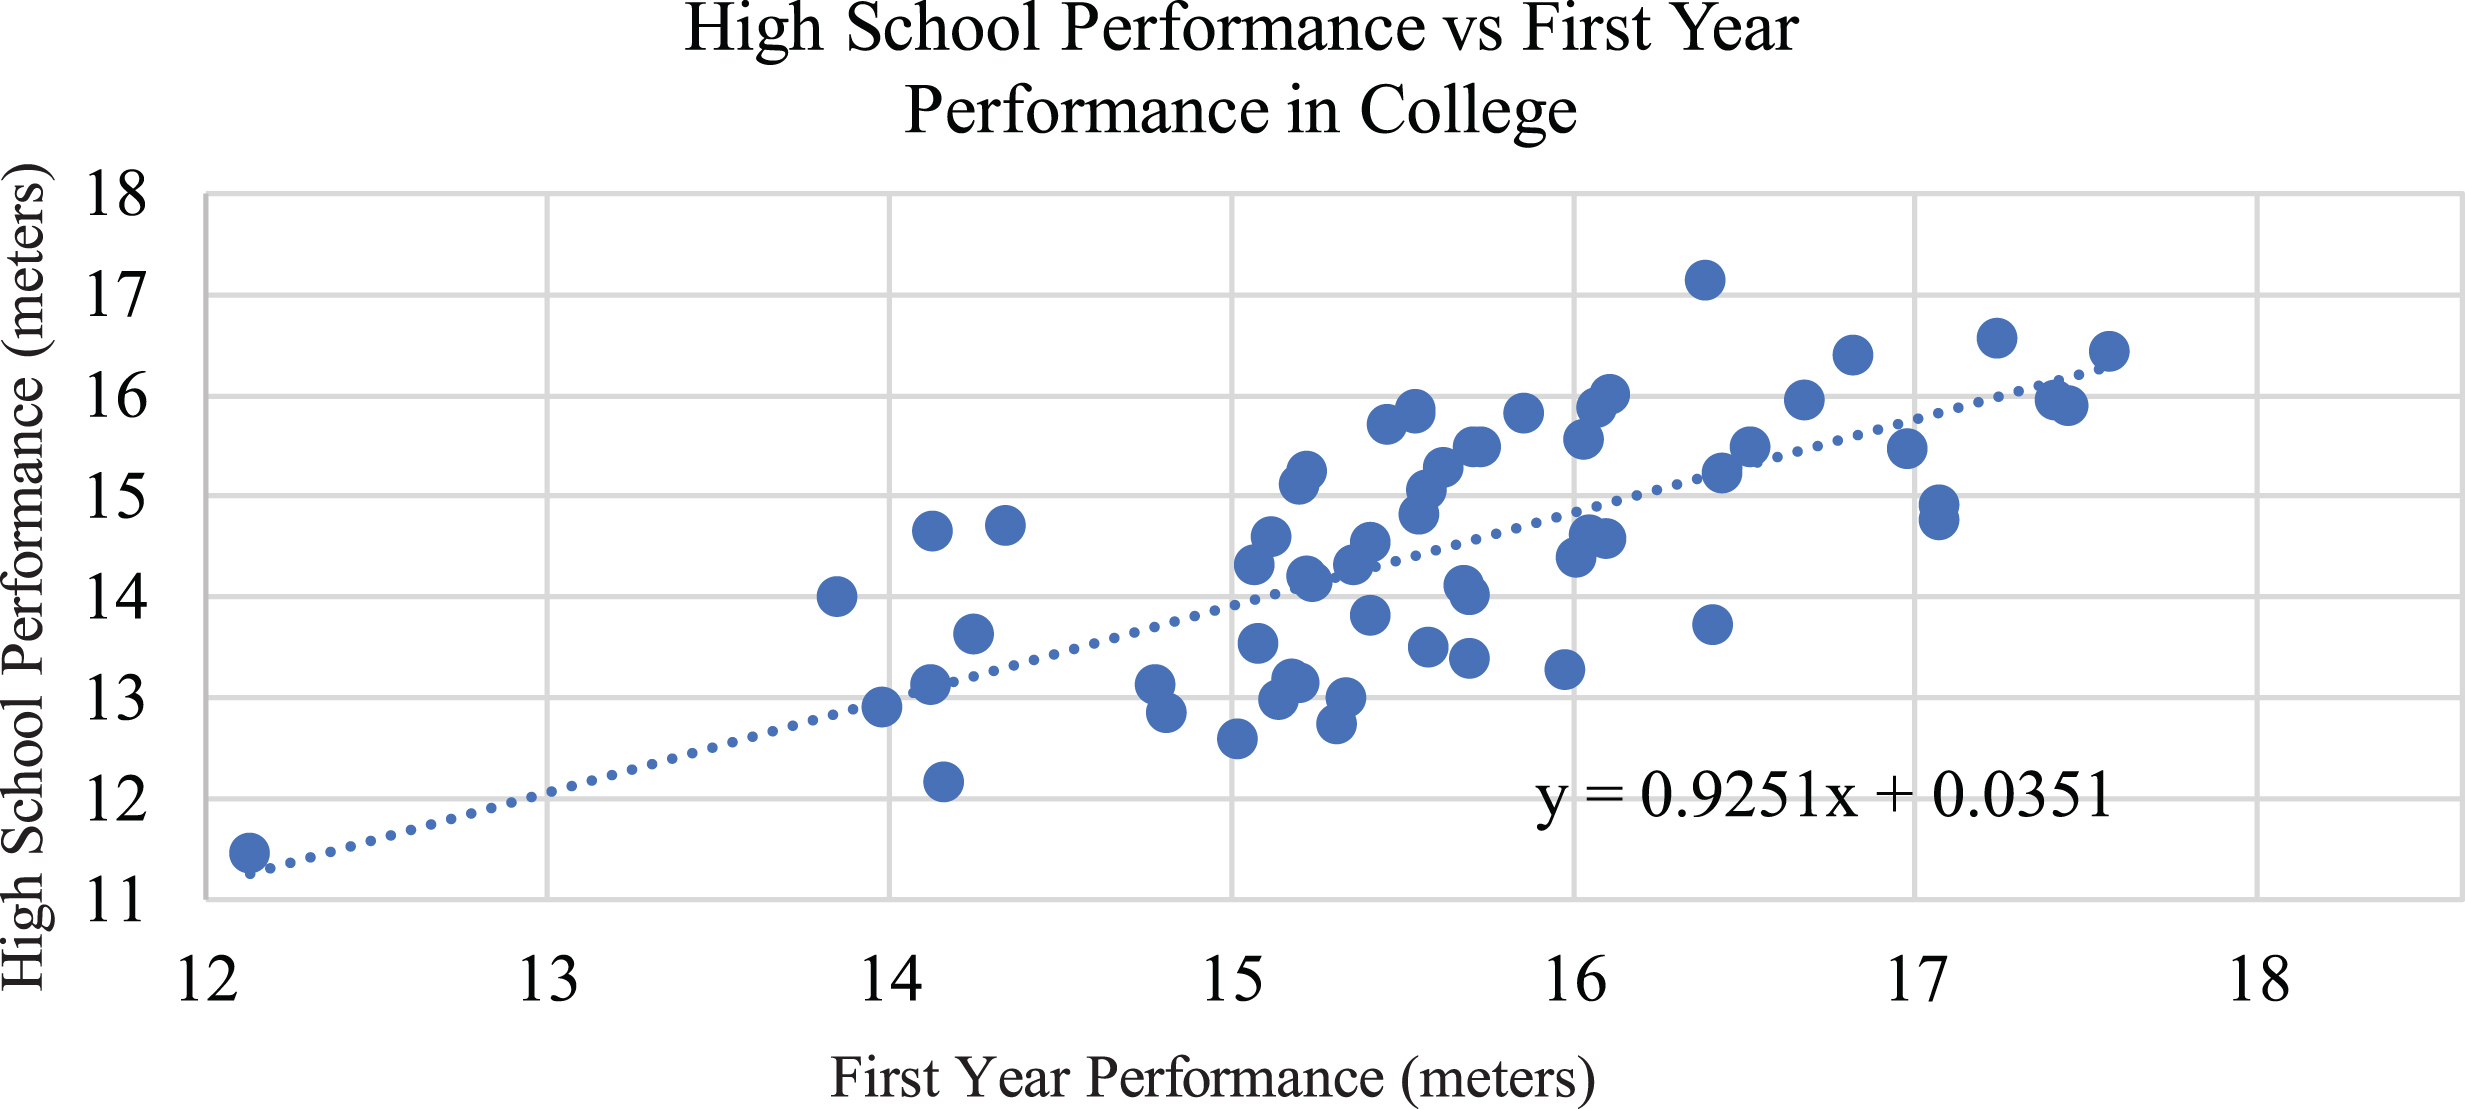 Trend lines for first year collegiate performance based on high school personal best.